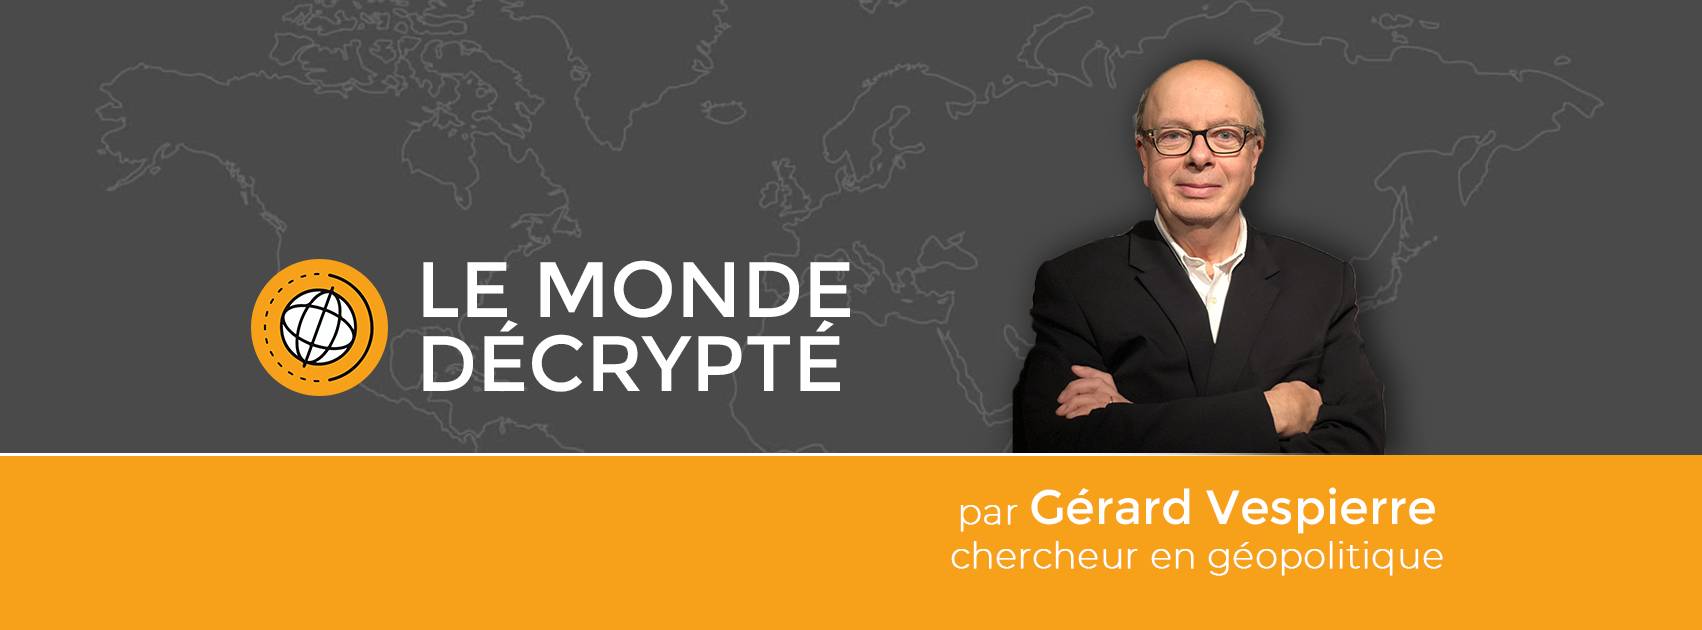 accompagnement podcast youtube youtubeur agence communication 95 66 geopolitique gerard vespierre